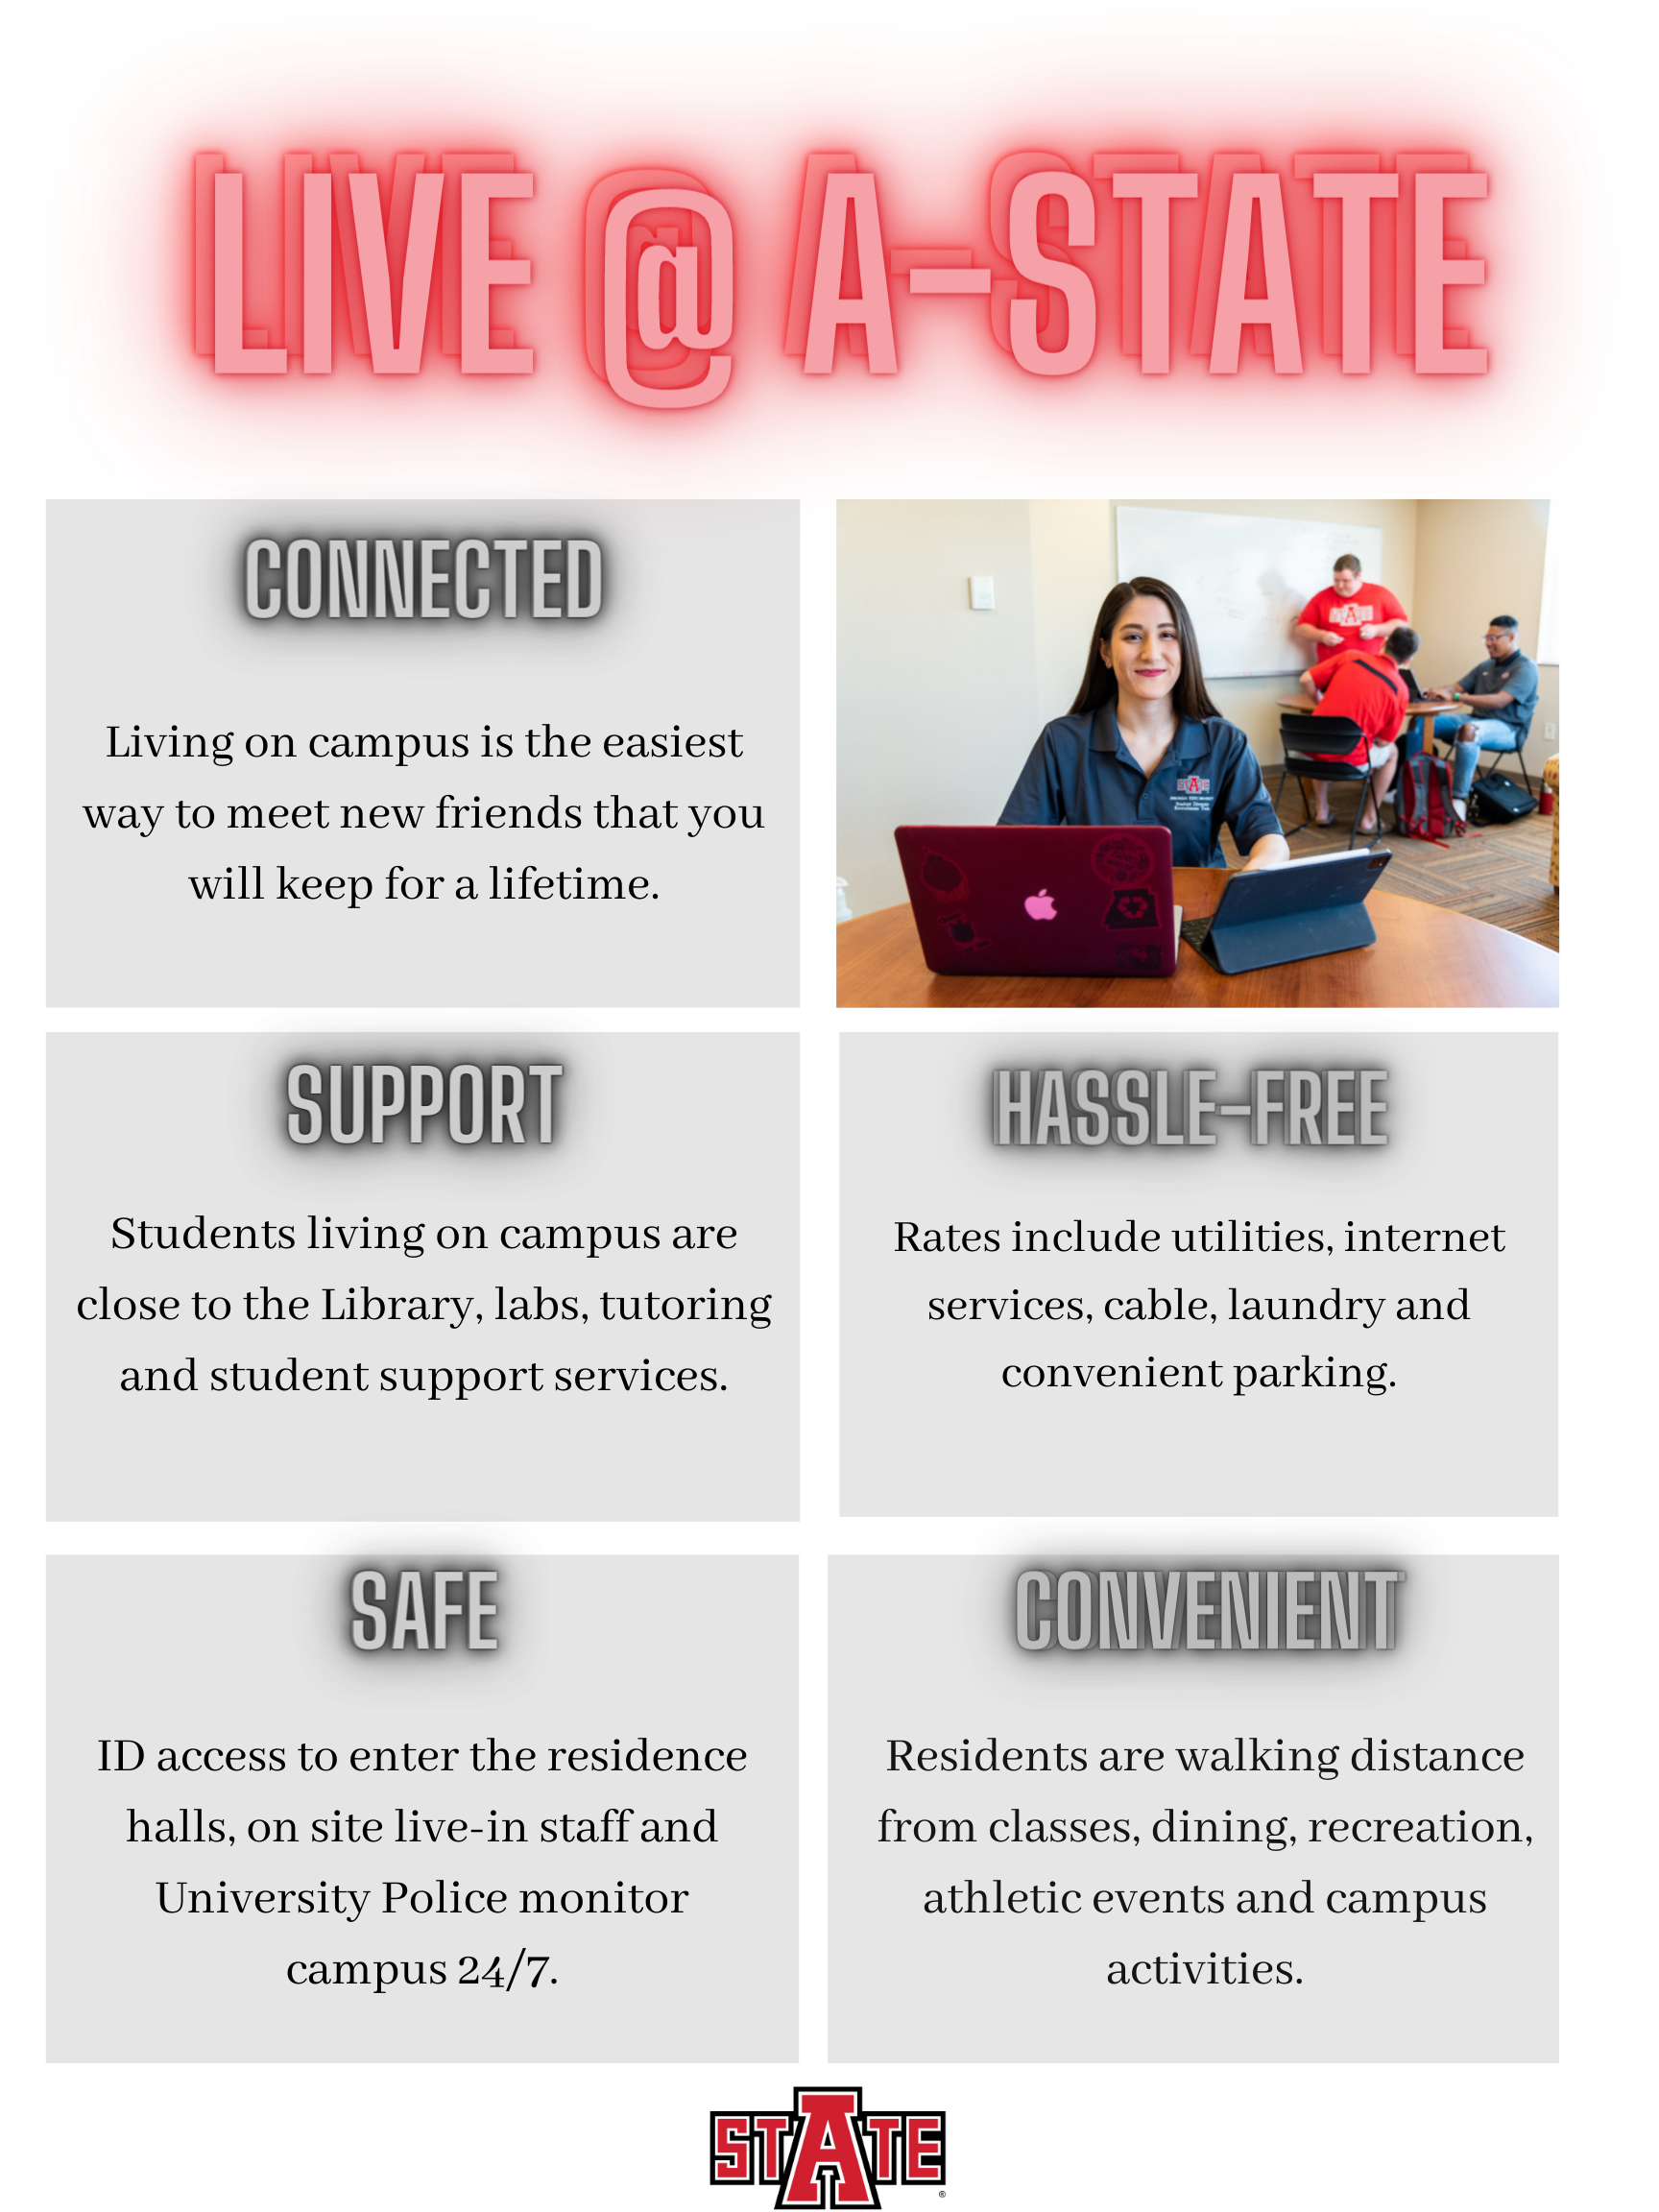 Why to Live At A-State